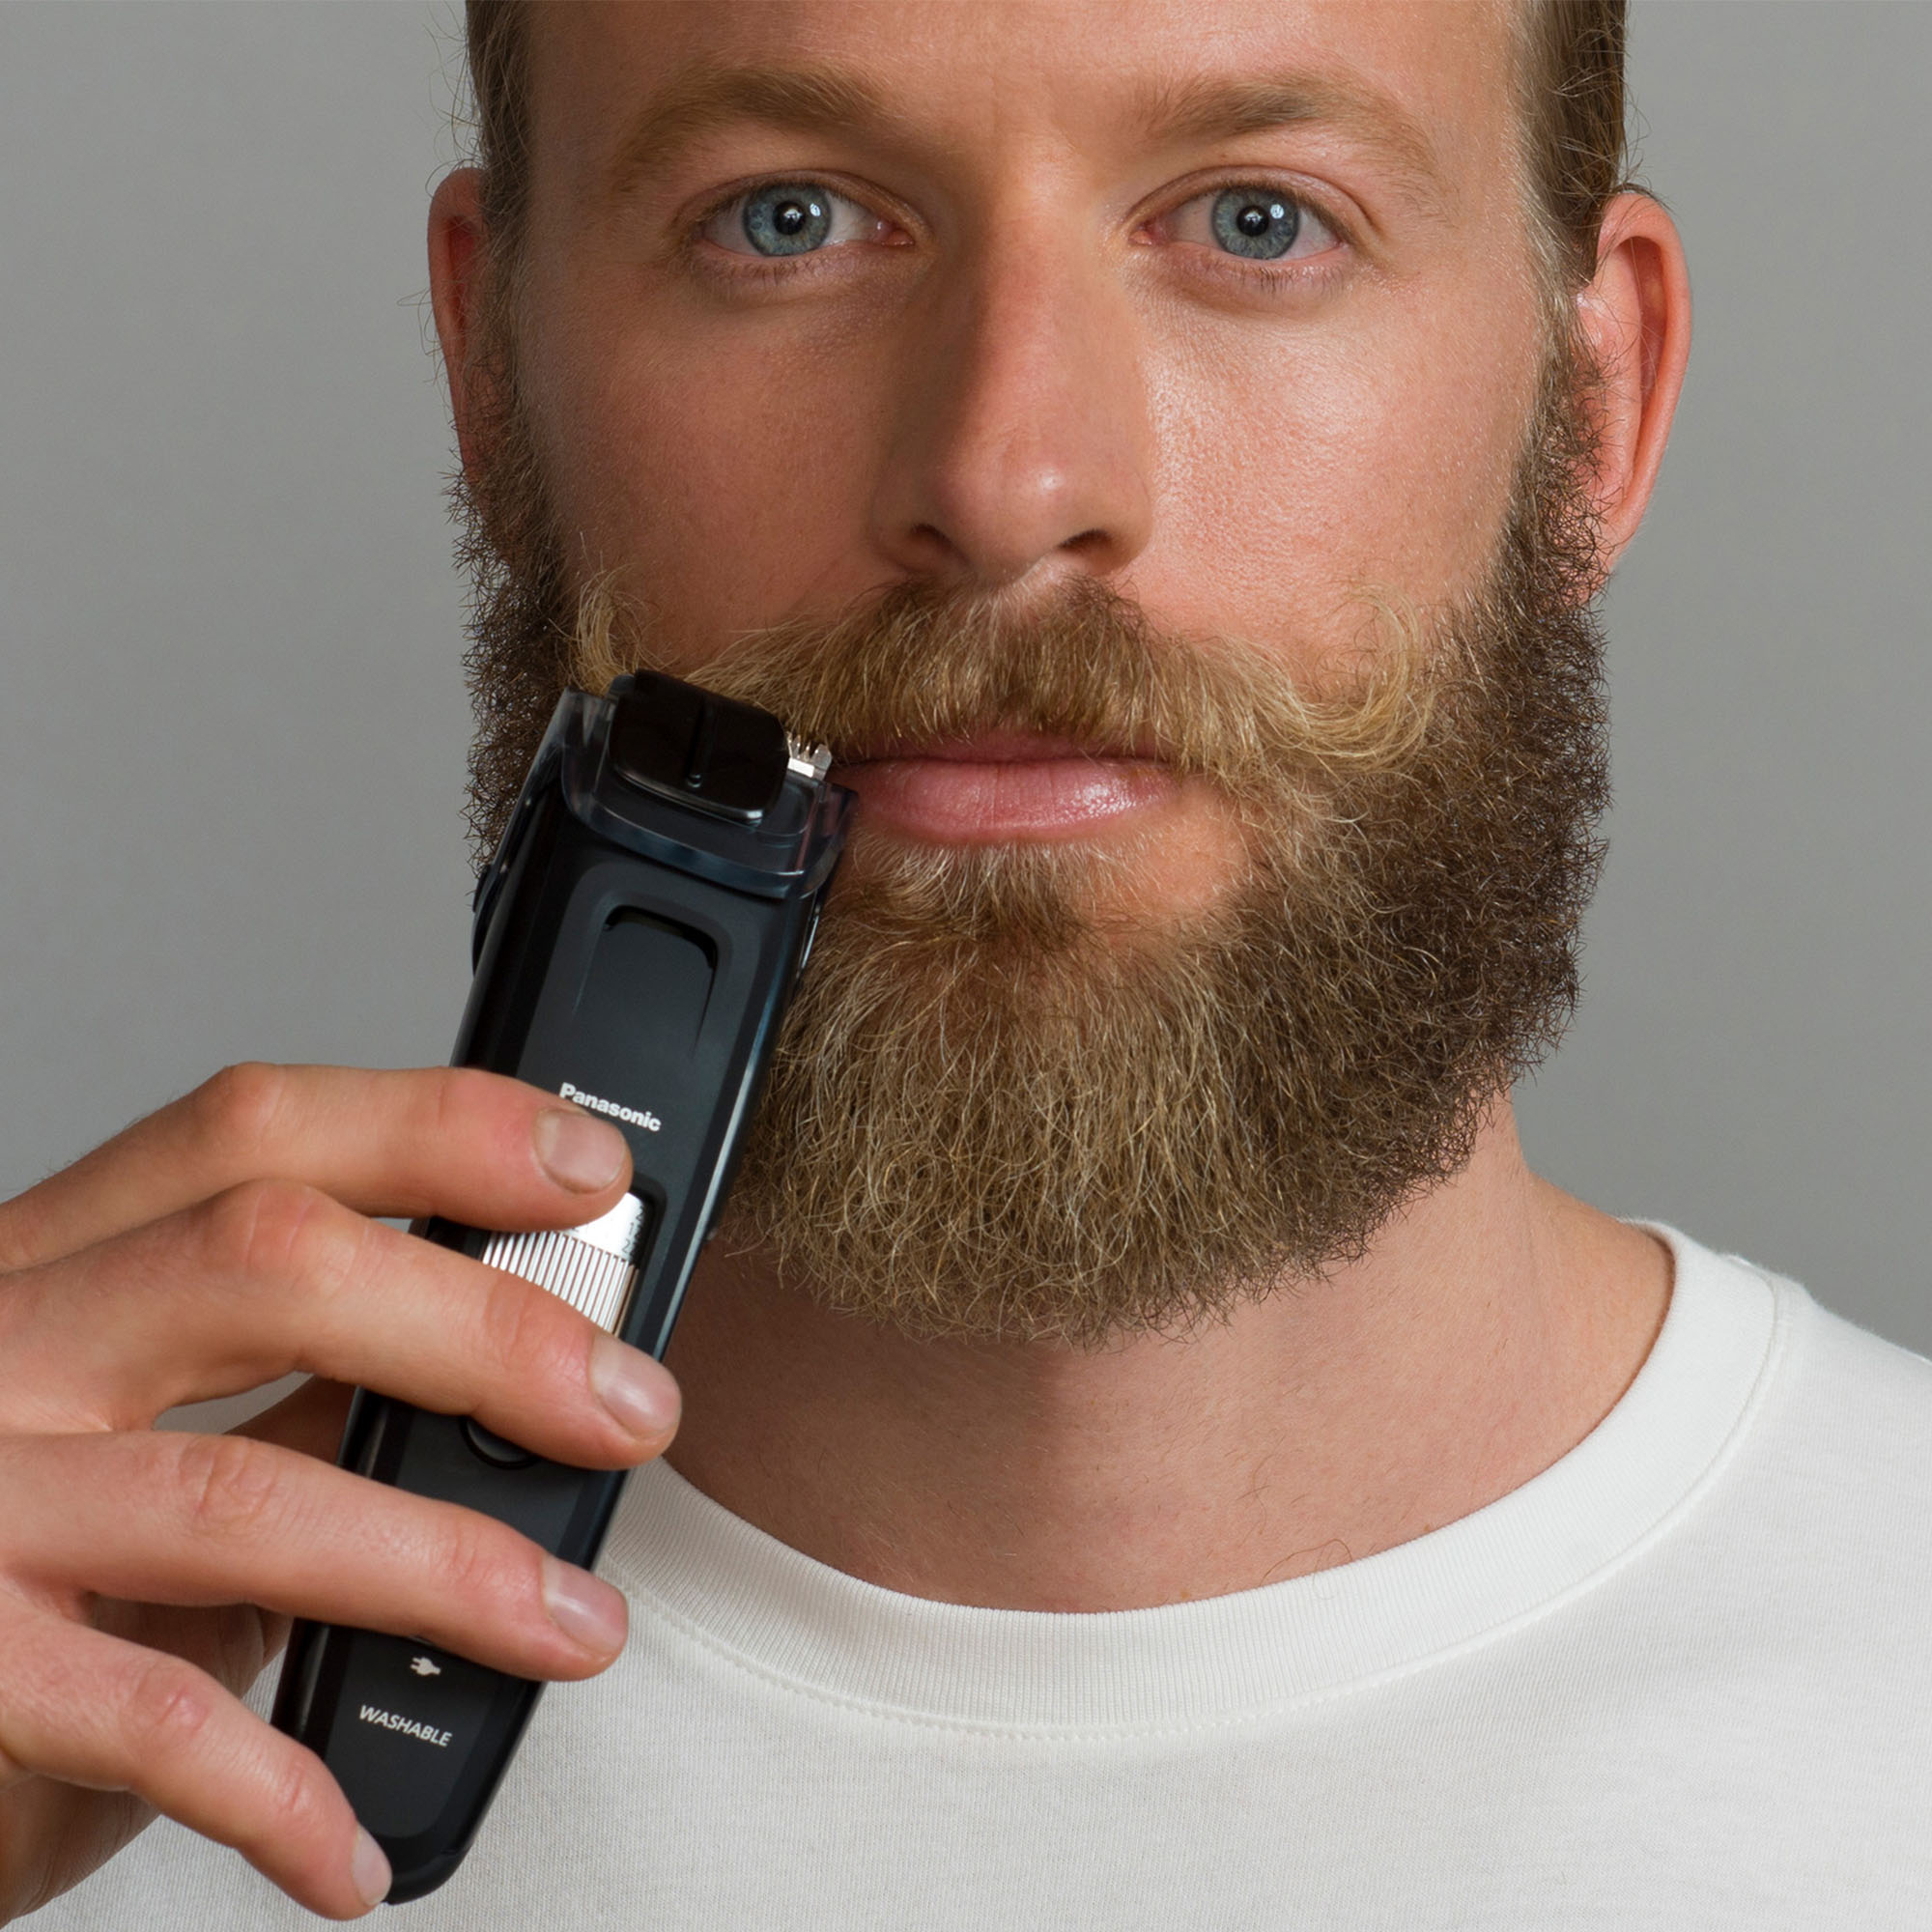 Wet/Dry Best Beard Panasonic 4 with ER-GB96-K Rechargeable Black Trimmer Buy: Attachments ER-GB96-K